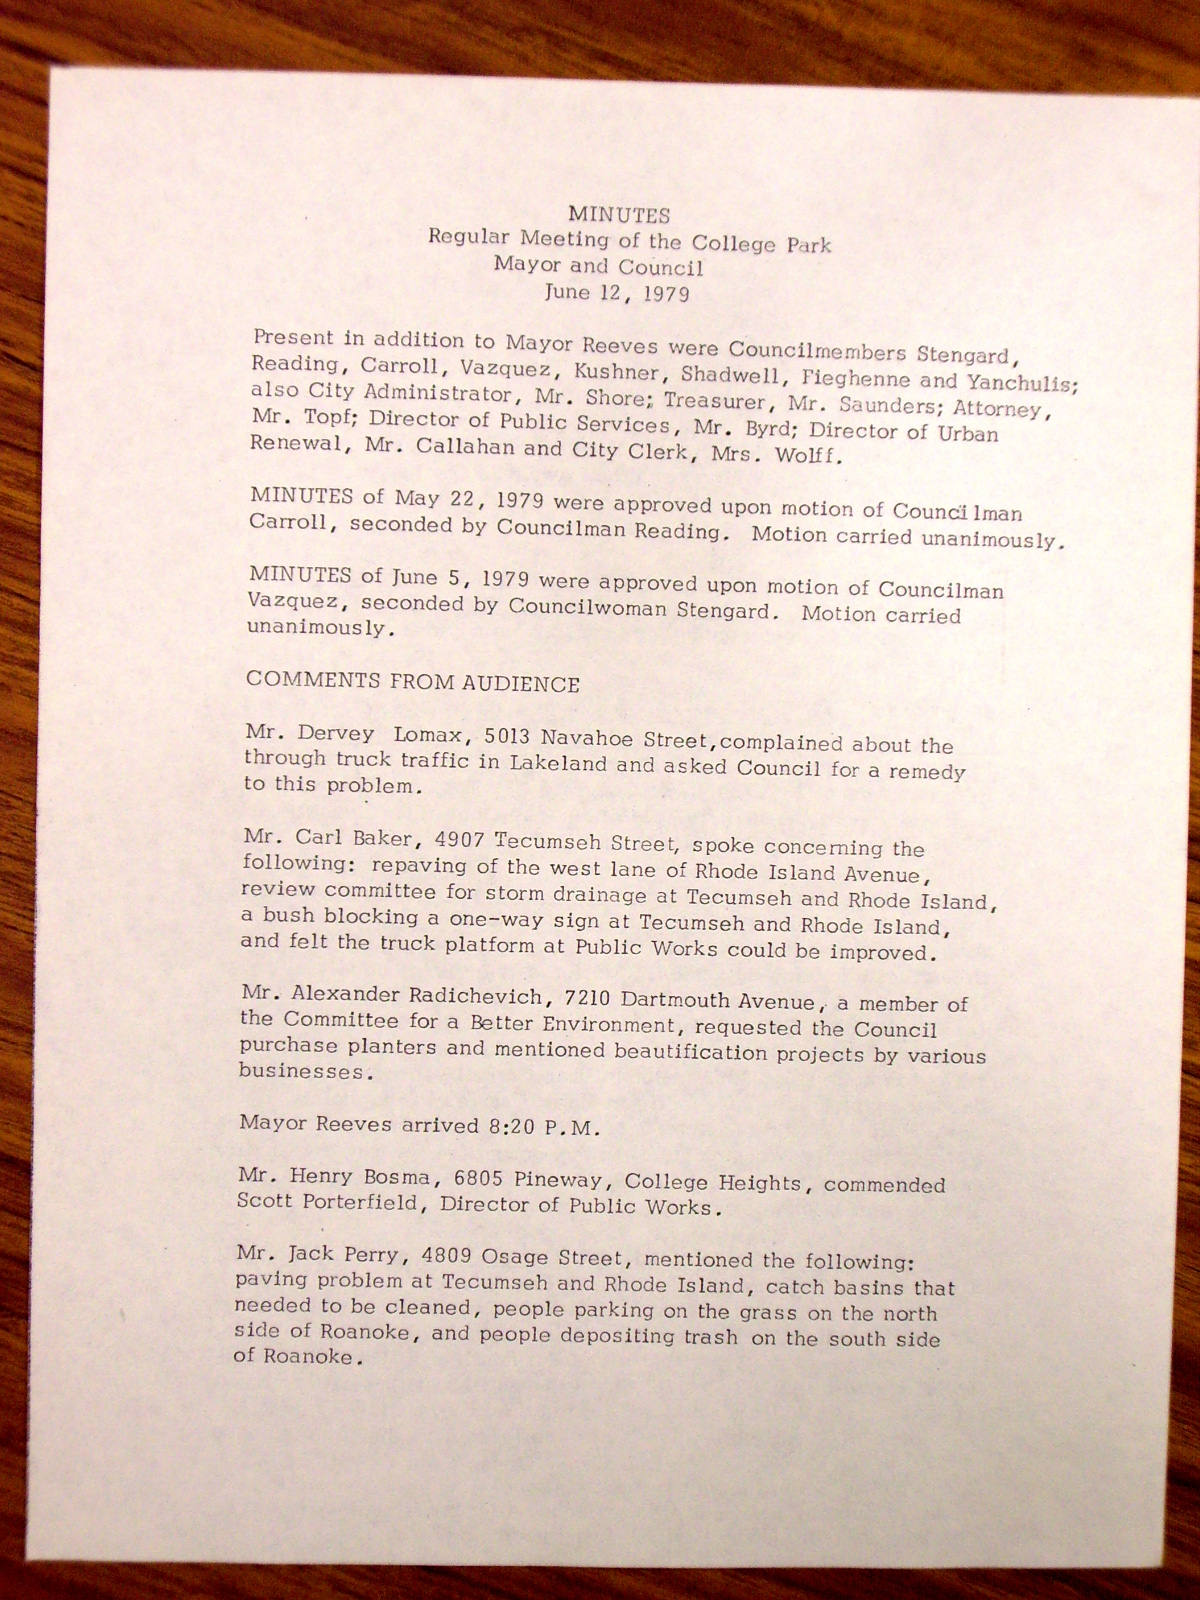 Minutes, Regular Meeting of the College Park Mayor and Council June 12, 1979